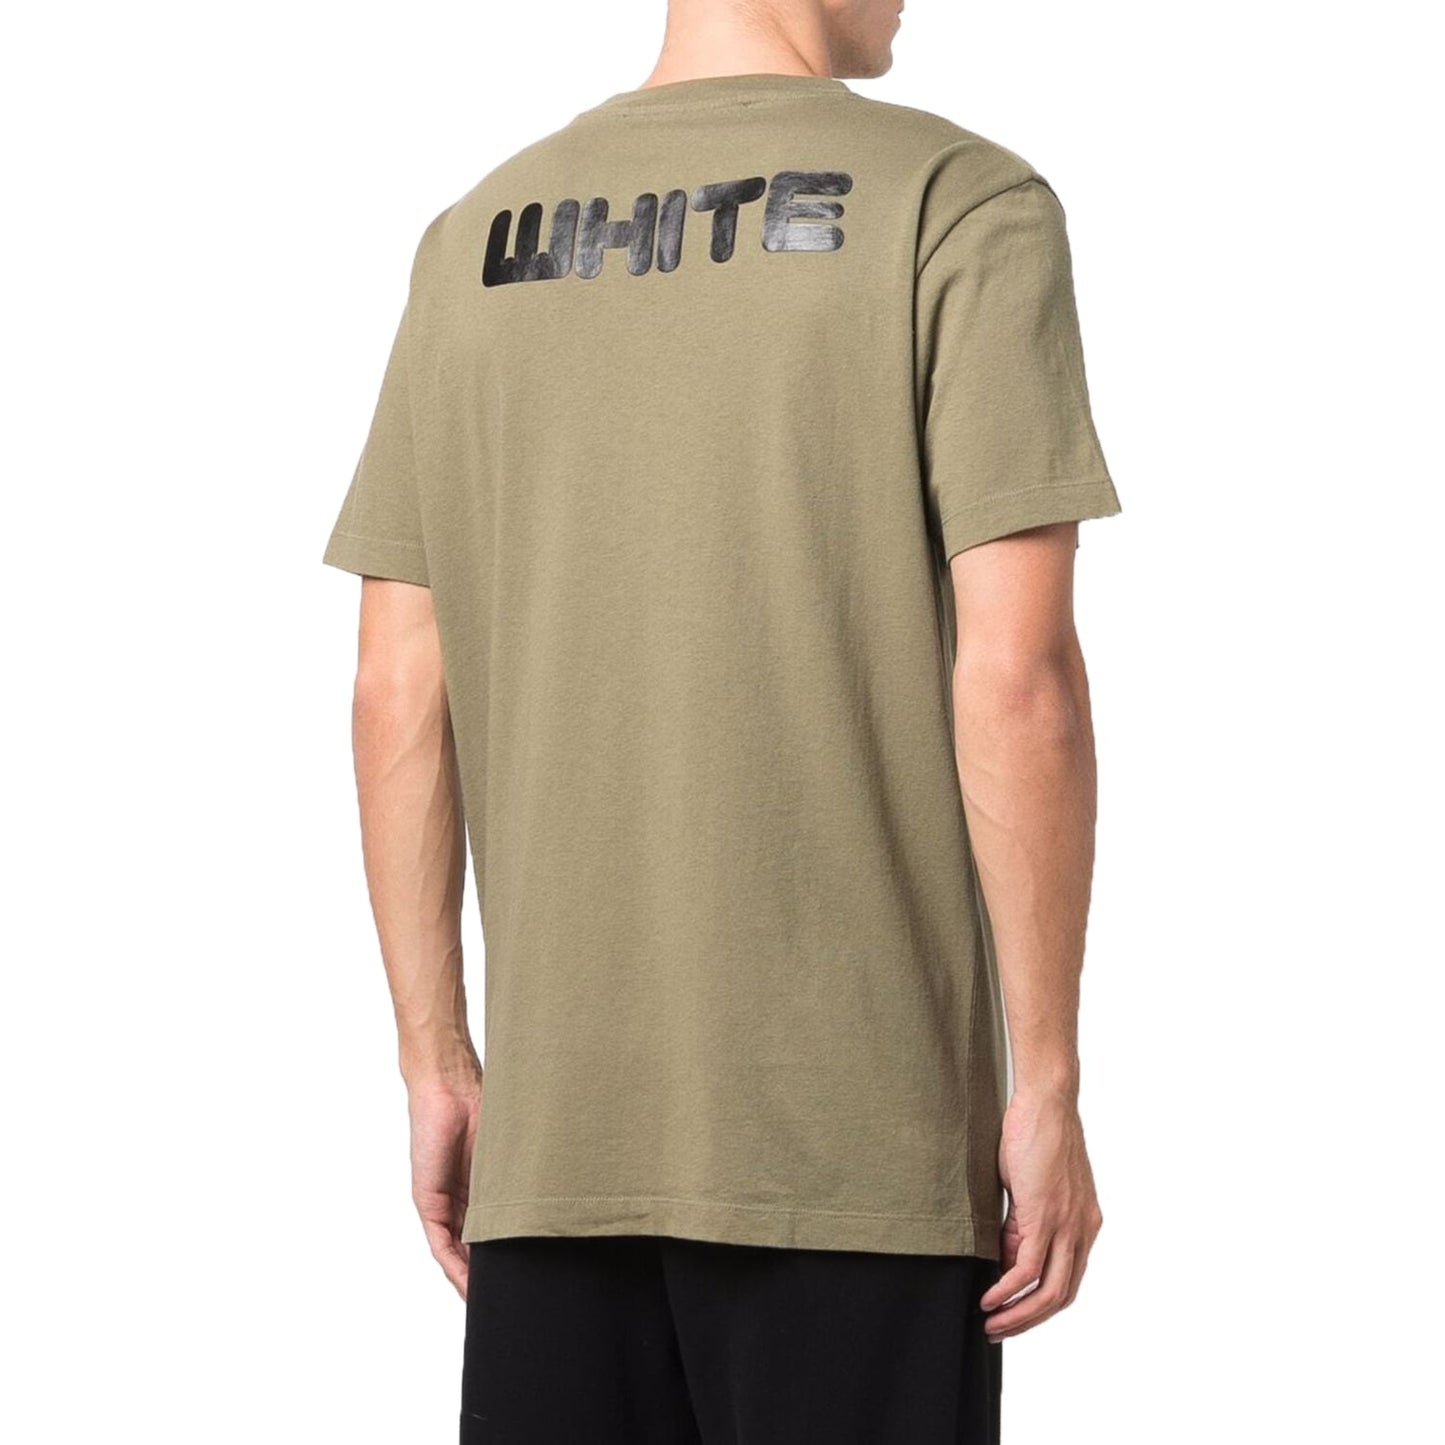 Off-white Arrows Font S/s Slim Tee Mens Style : Omaa027f21jer0035510